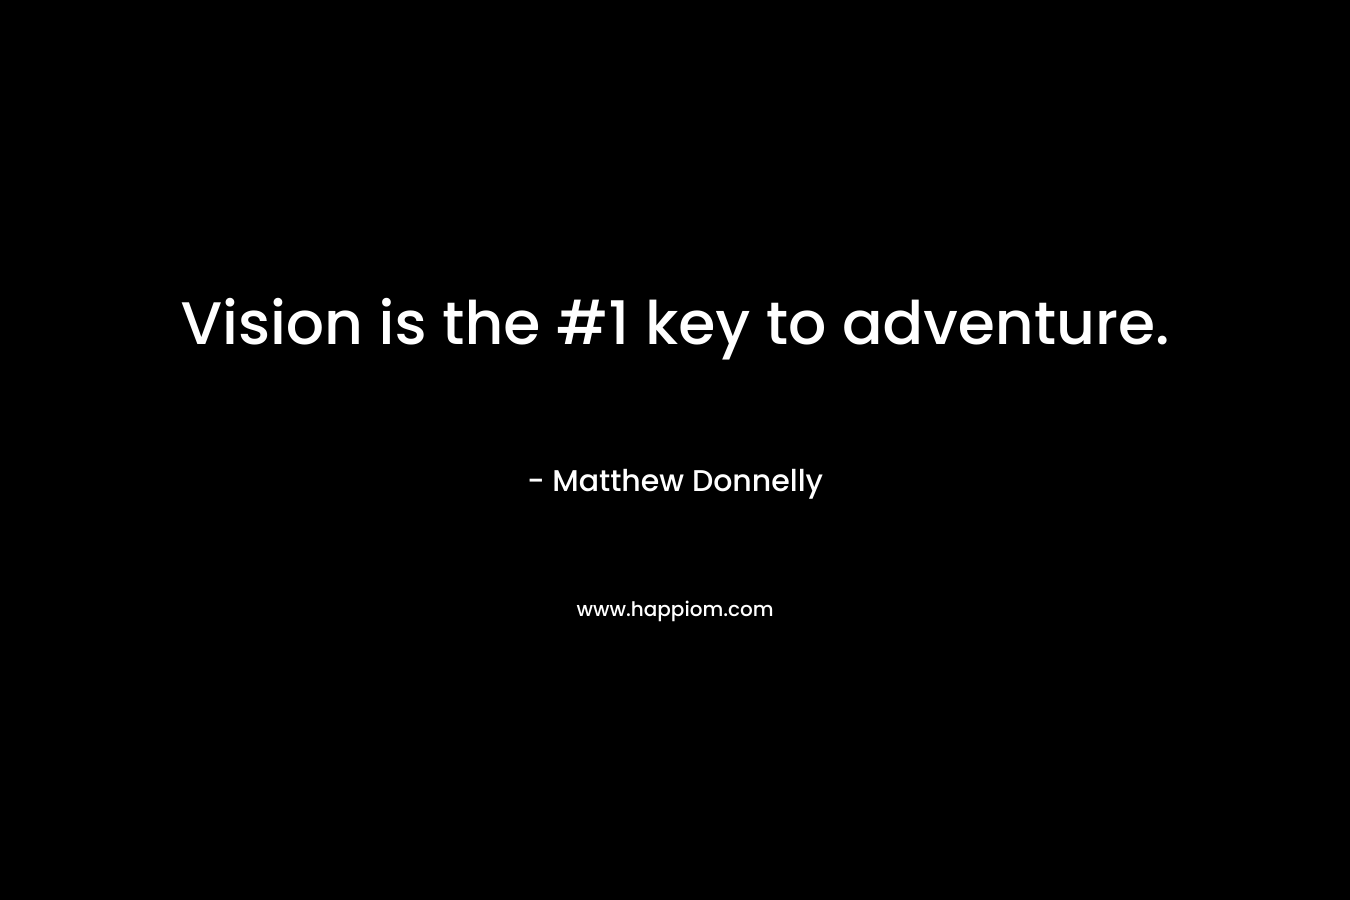 Vision is the #1 key to adventure.